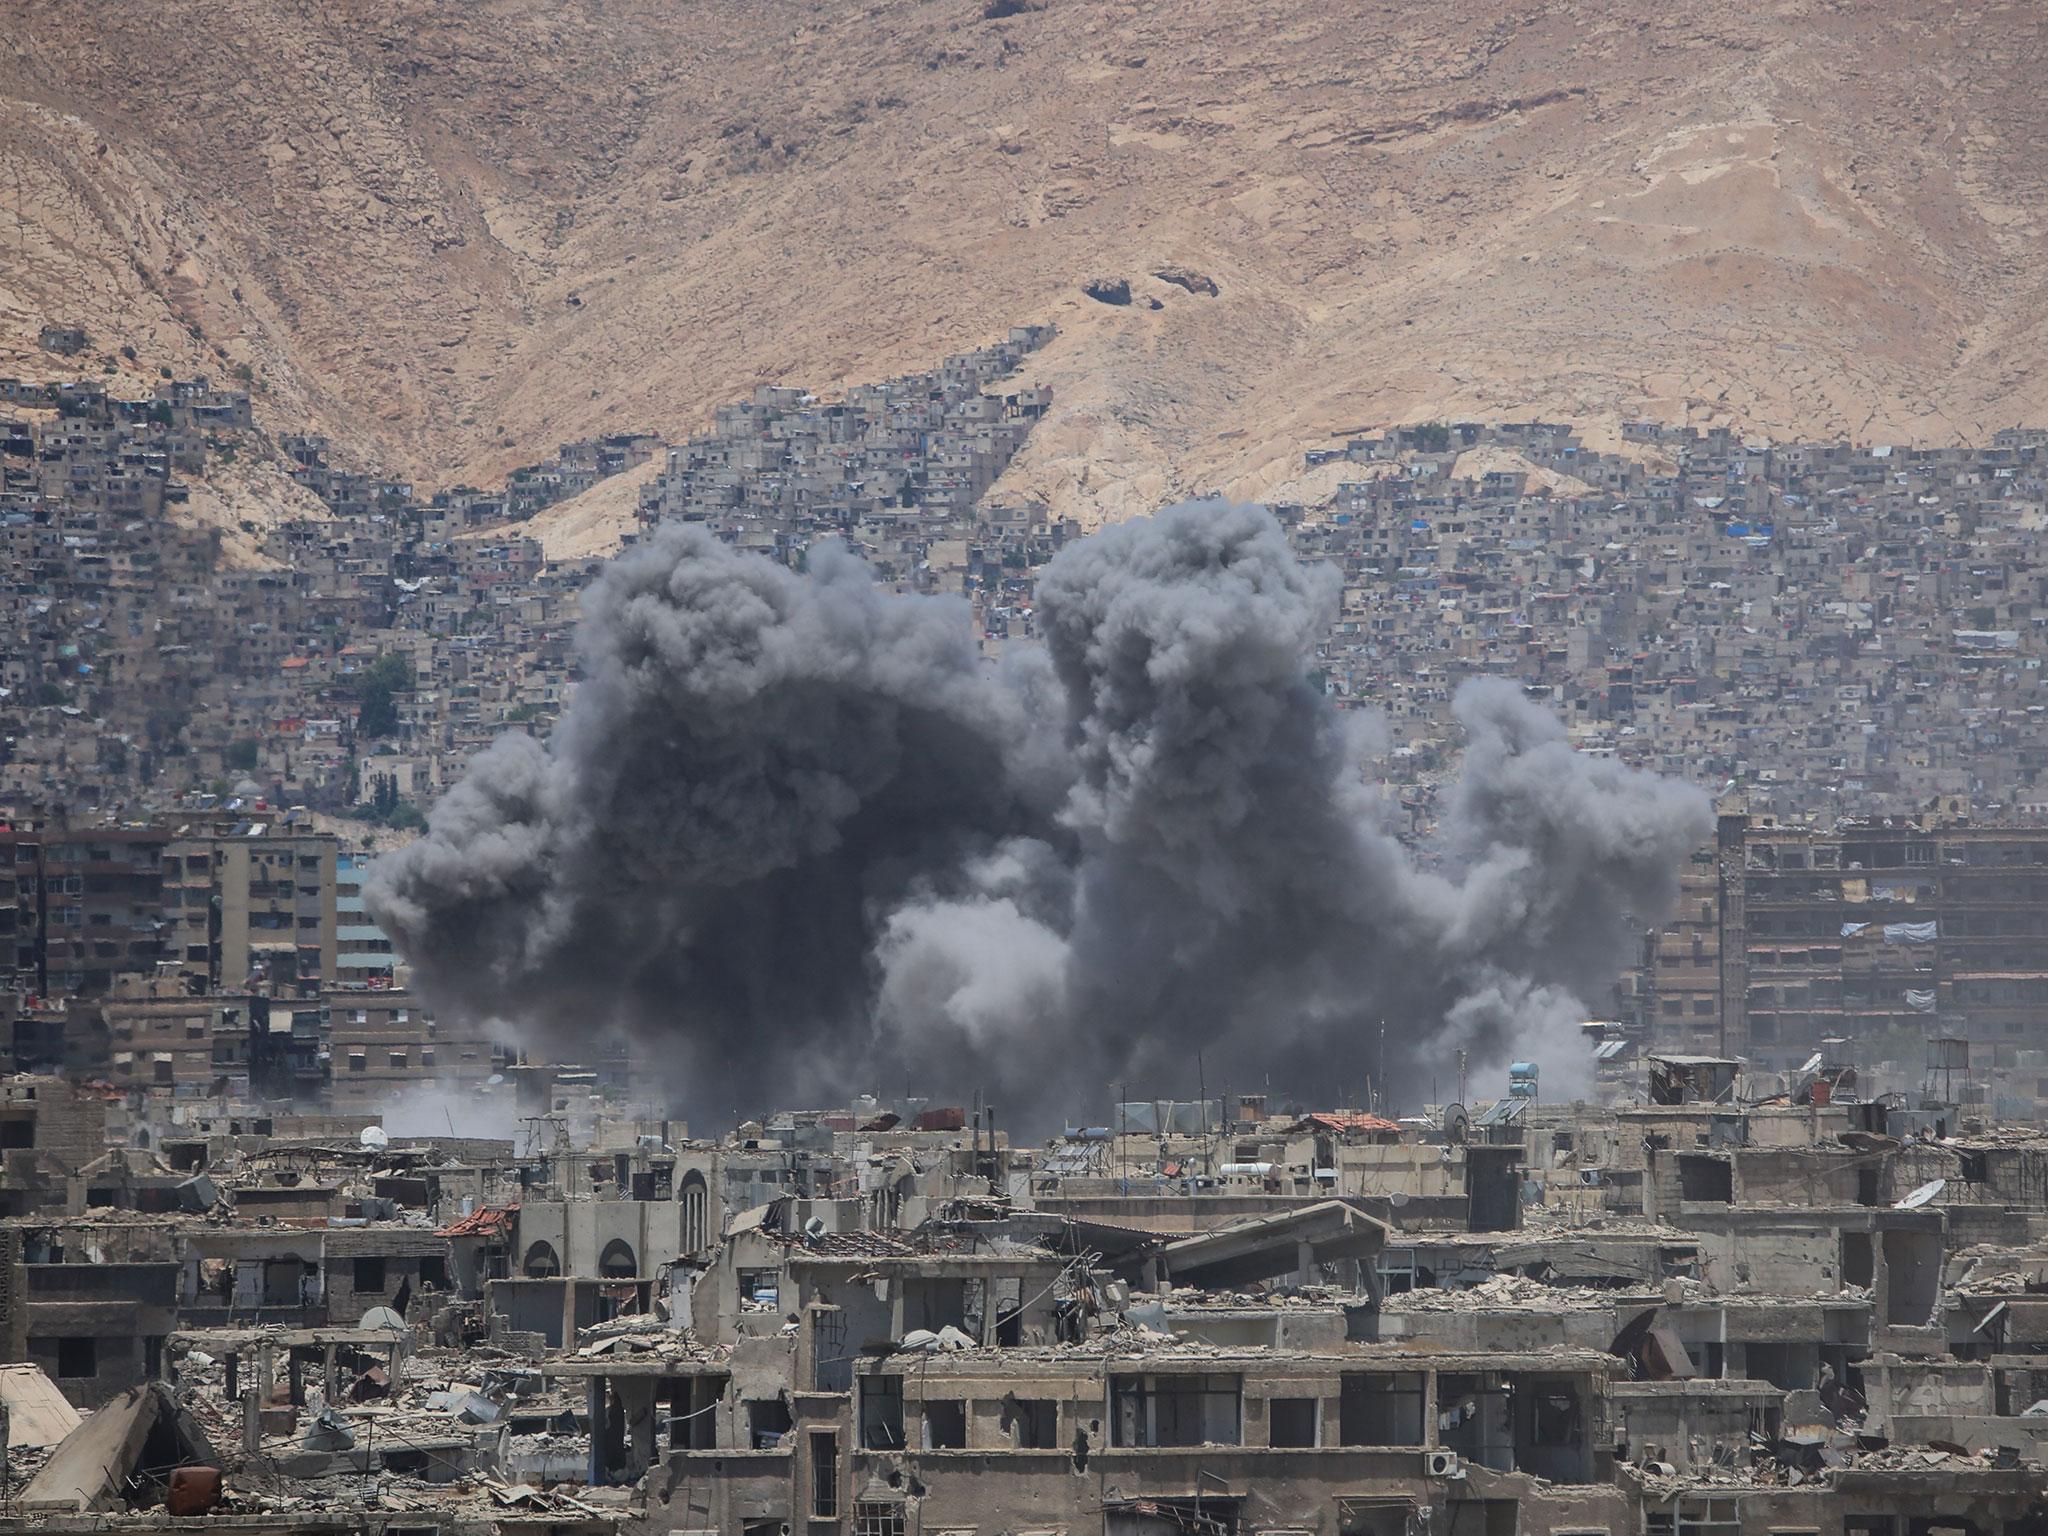 Smoke billows following a reported air strike in the rebel-held parts of the Jobar district, on the eastern outskirts of the Syrian capital Damascus, on 18 June, 2017